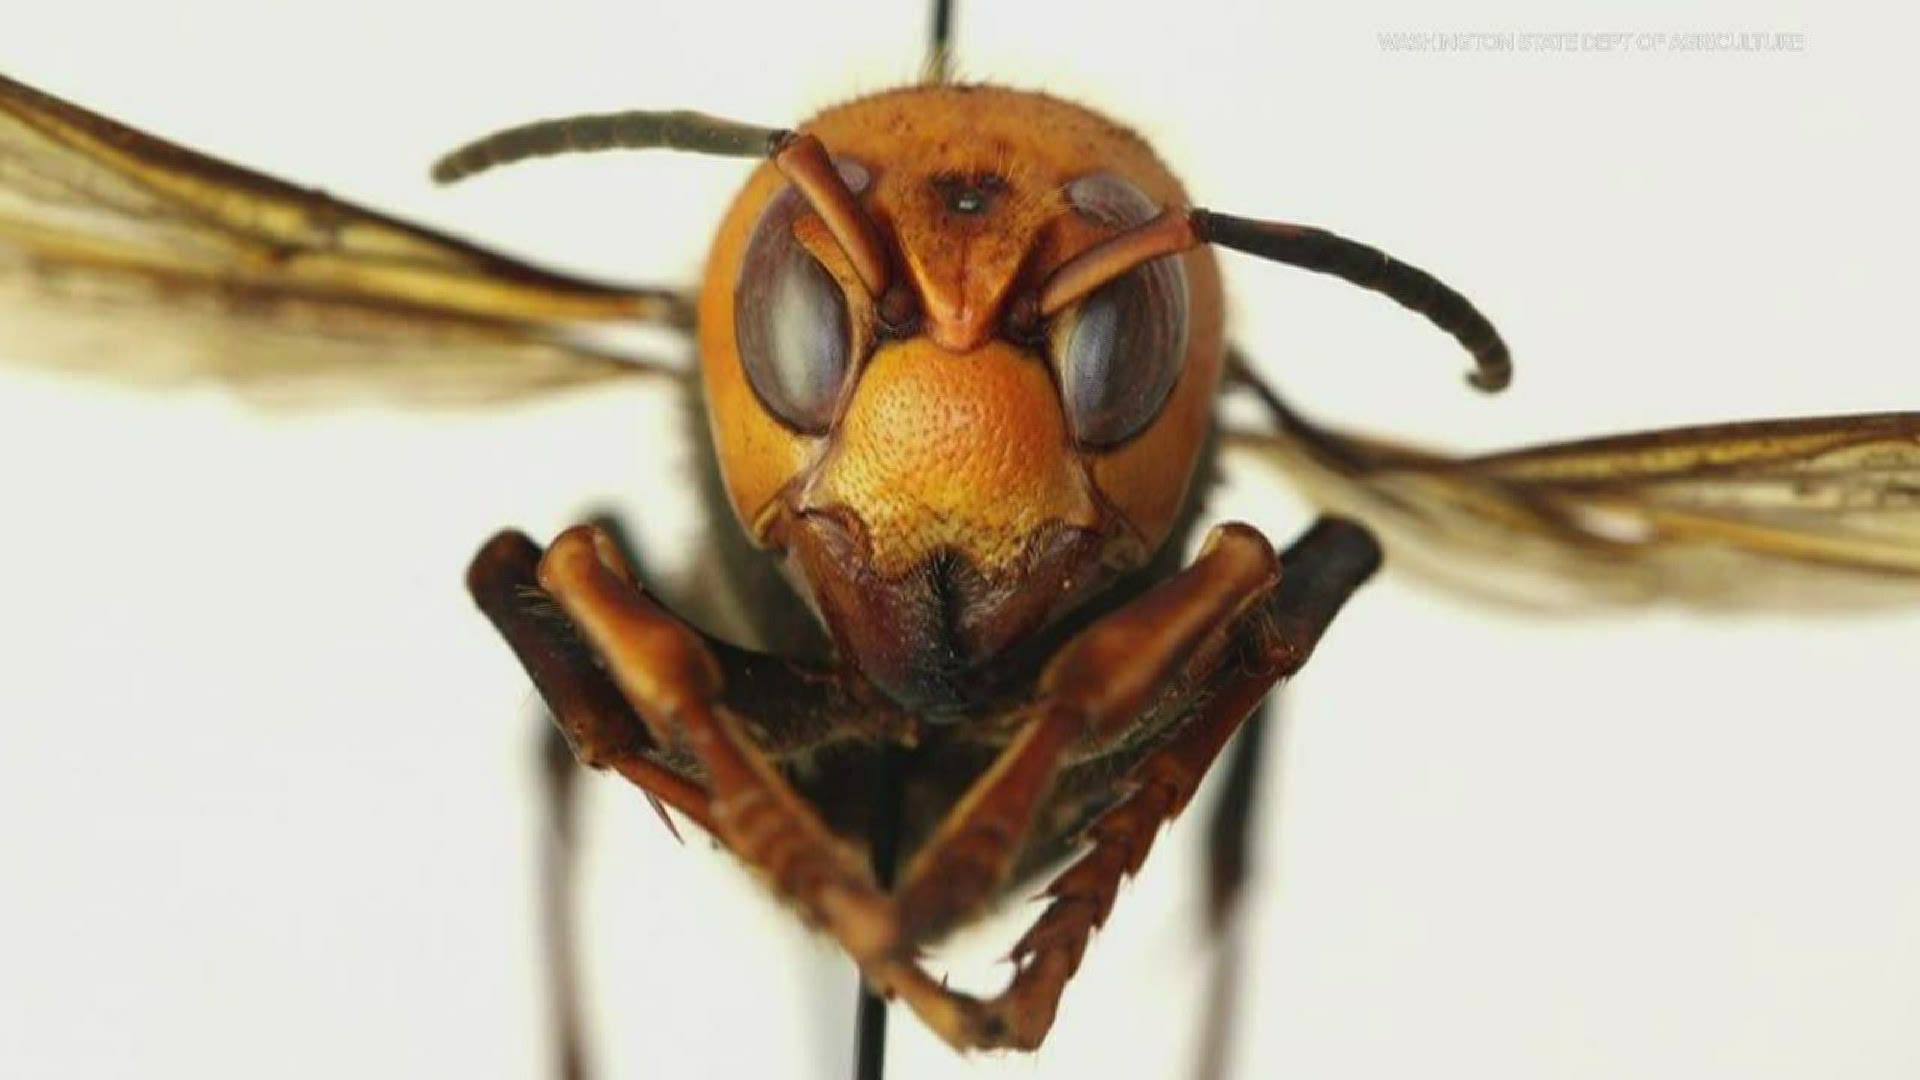 They're actually called Asian Giant Hornets and the invasive species has been found in Washington state.